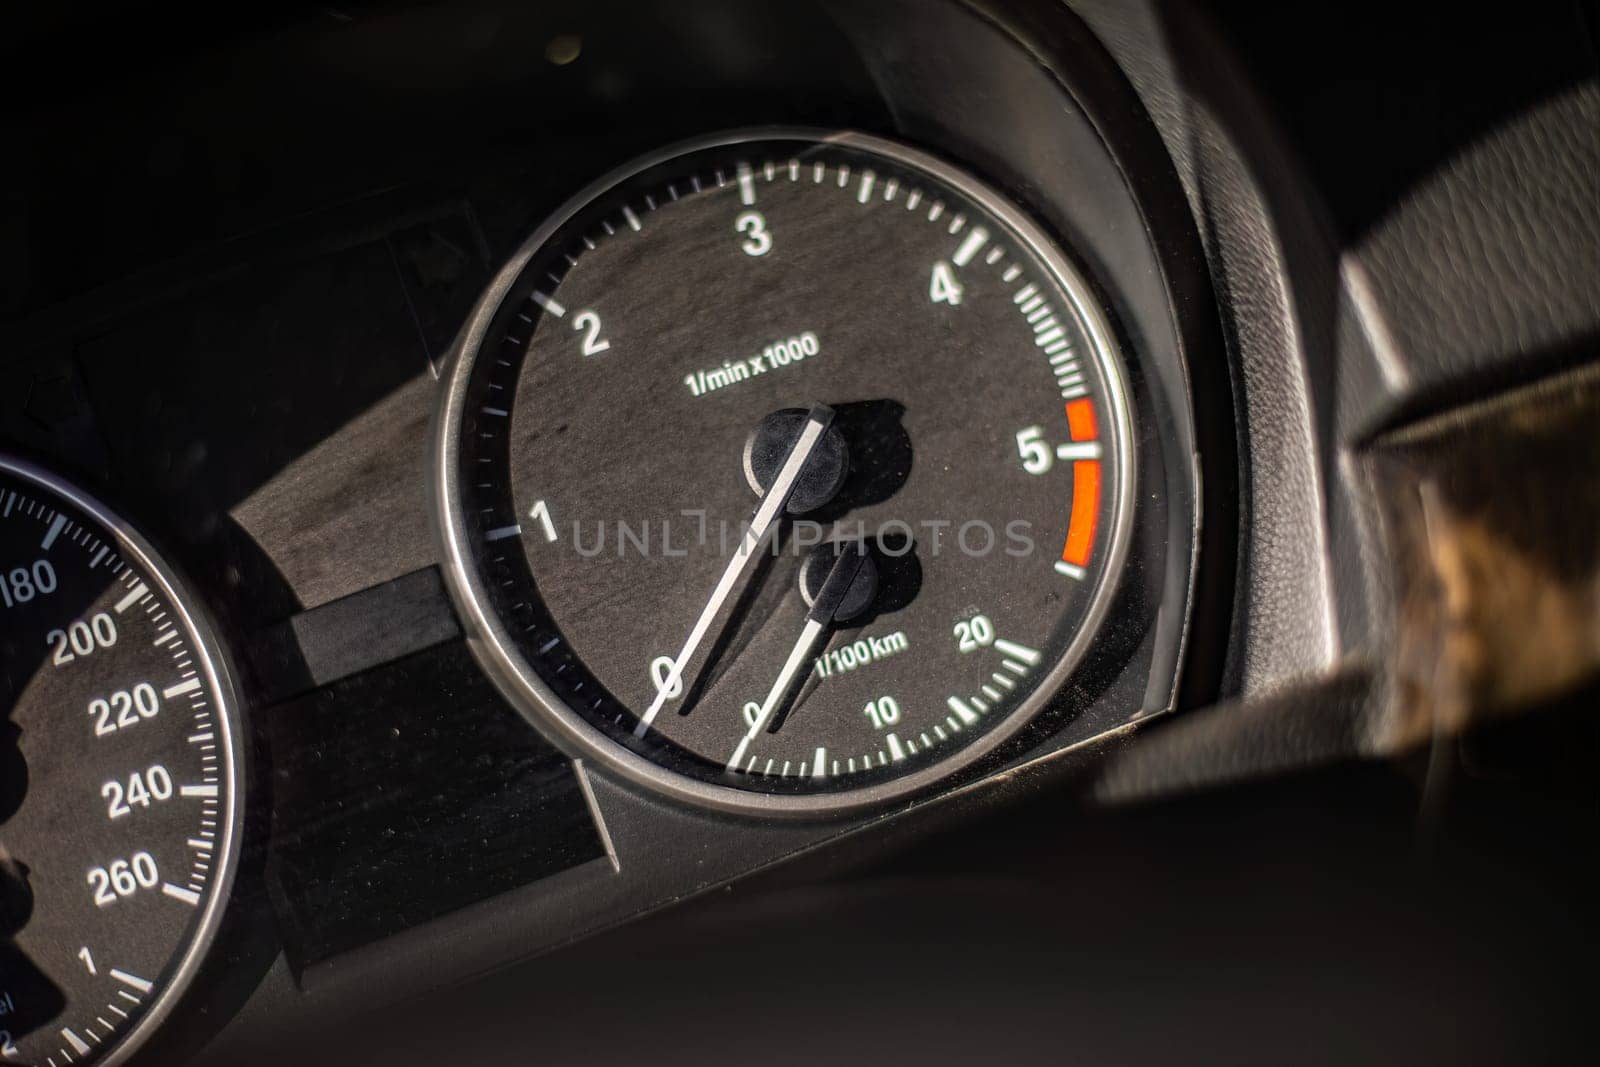 A close-up view of a speedometer on a car, capturing the dynamic movement of the needle as it responds to the vehicles speed on the road.